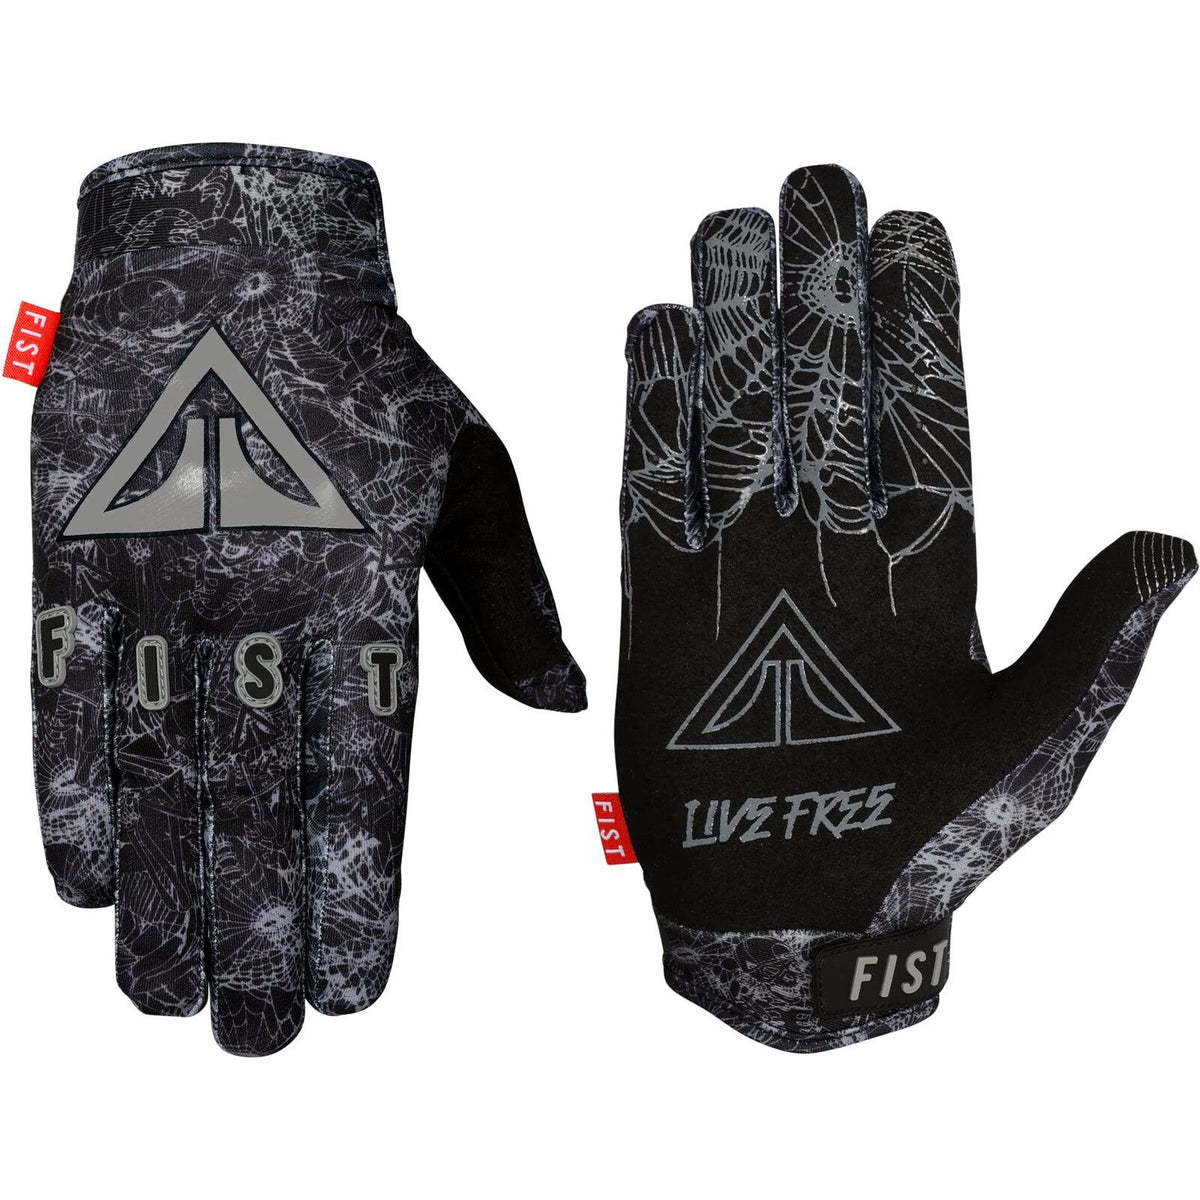 FIST-HANDWEAR-STRAPPED-COLBY-RAHA-RIDE - GLOVE - Synik Clothing - synikclothing.com